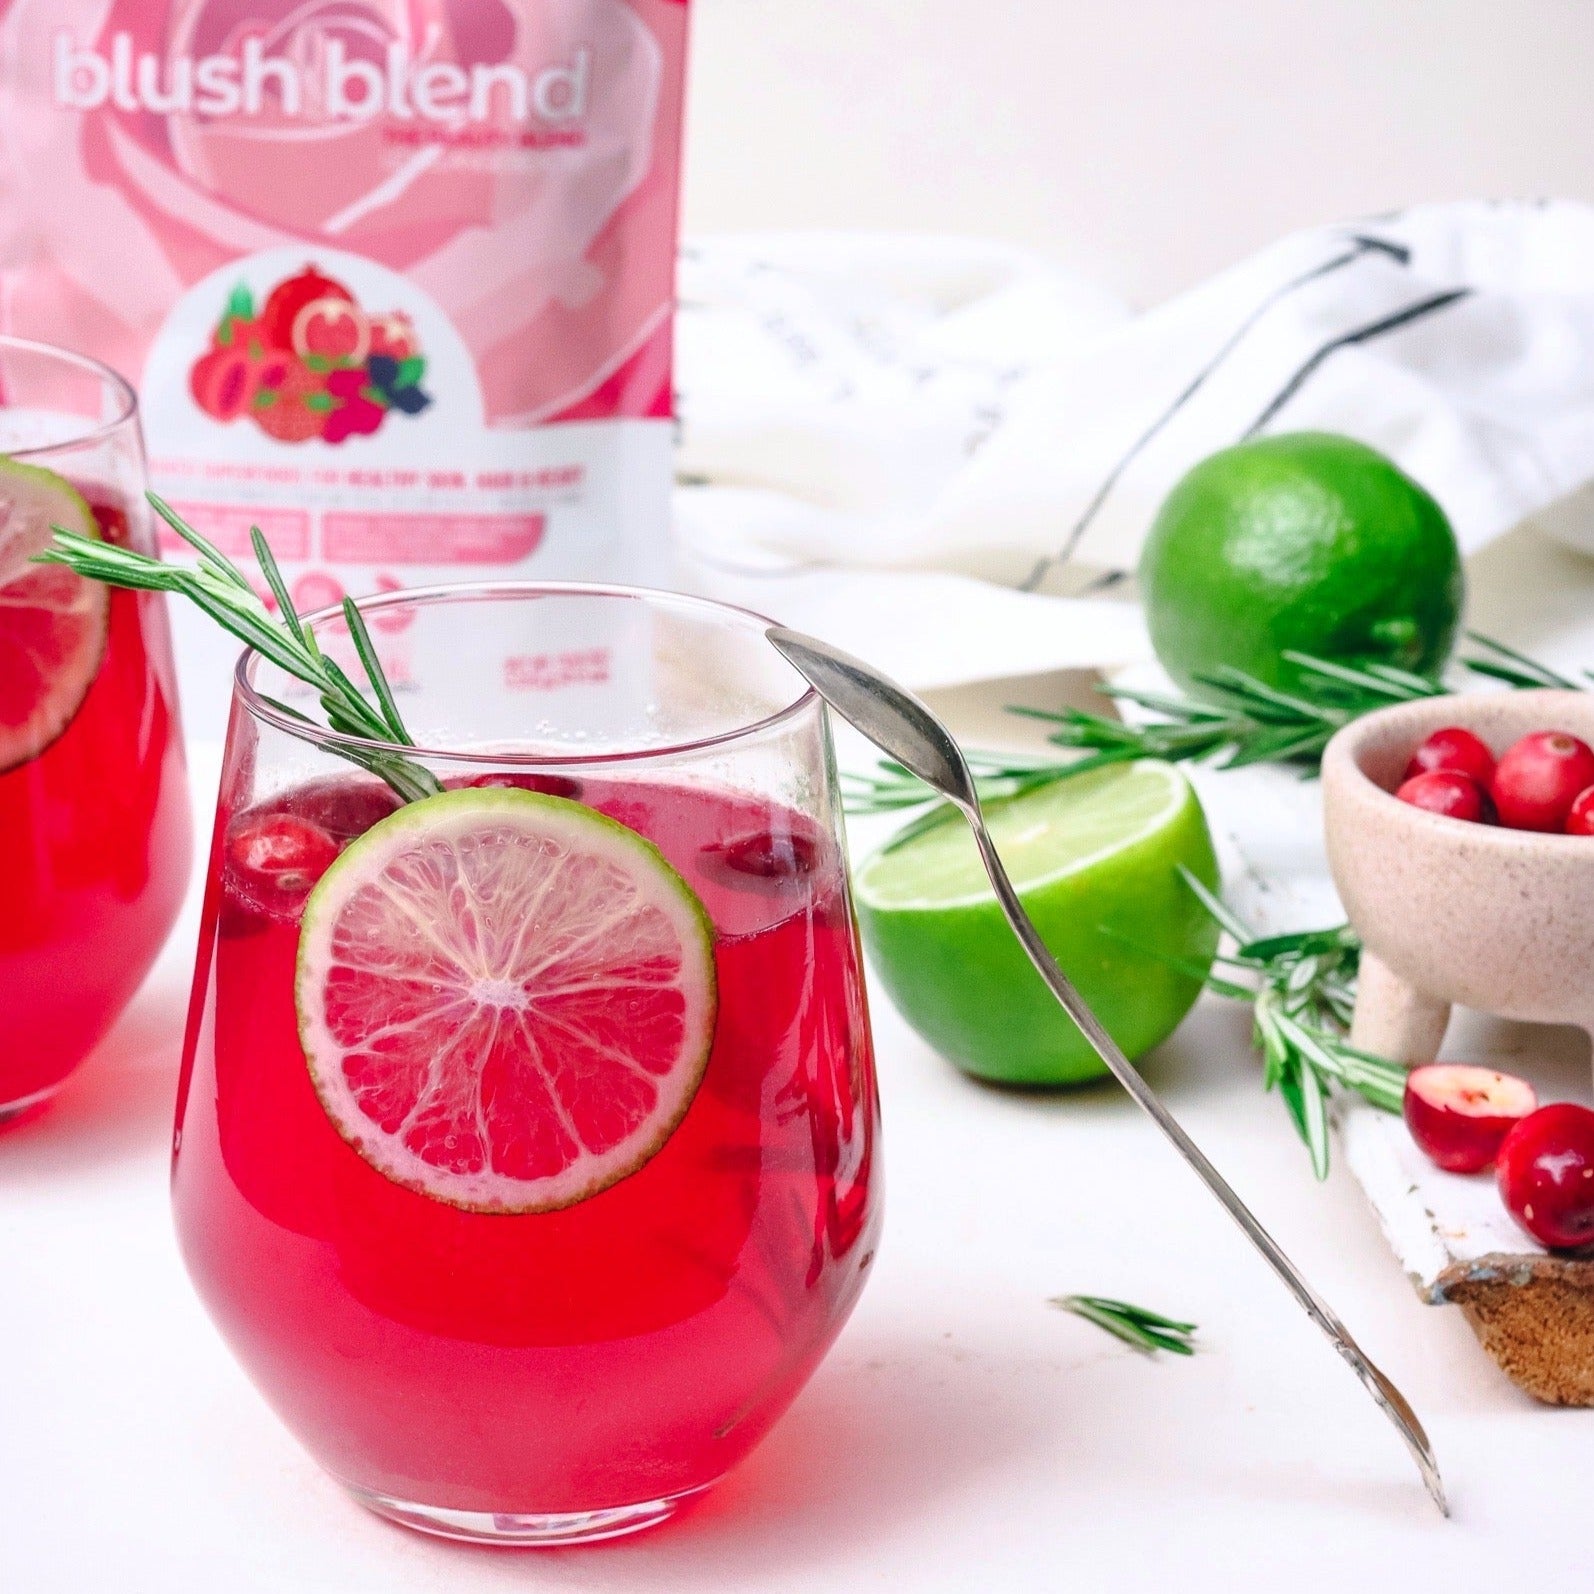 Blush mocktail made using smoov superfood blends and powders. Packed with antioxidants for health & wellness. Keto Friendly